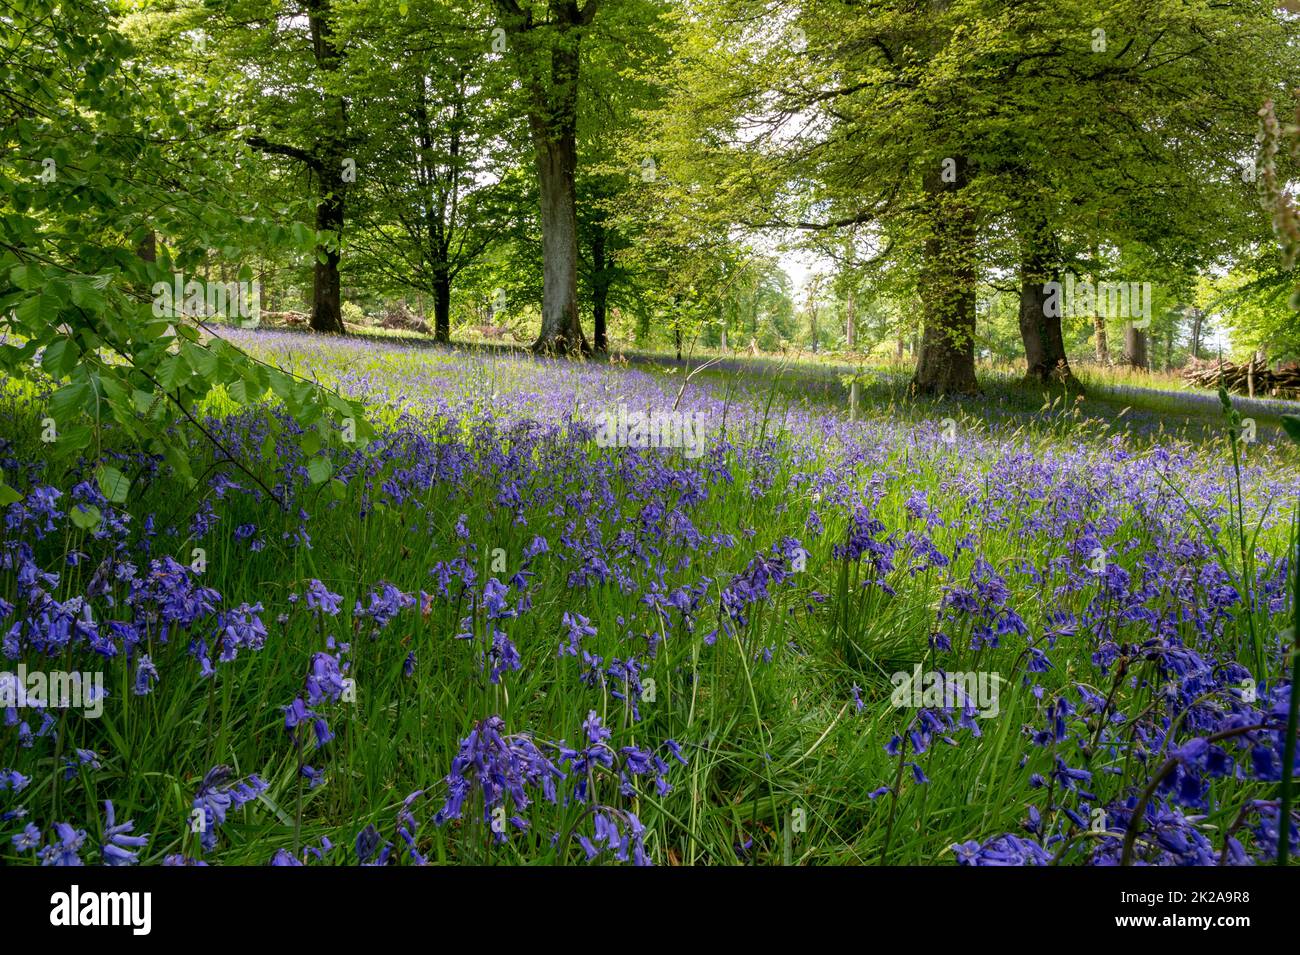 Swathes of English bluebells in woodland at the Pencarrow House and gardens, Cornwall, UK. Stock Photo